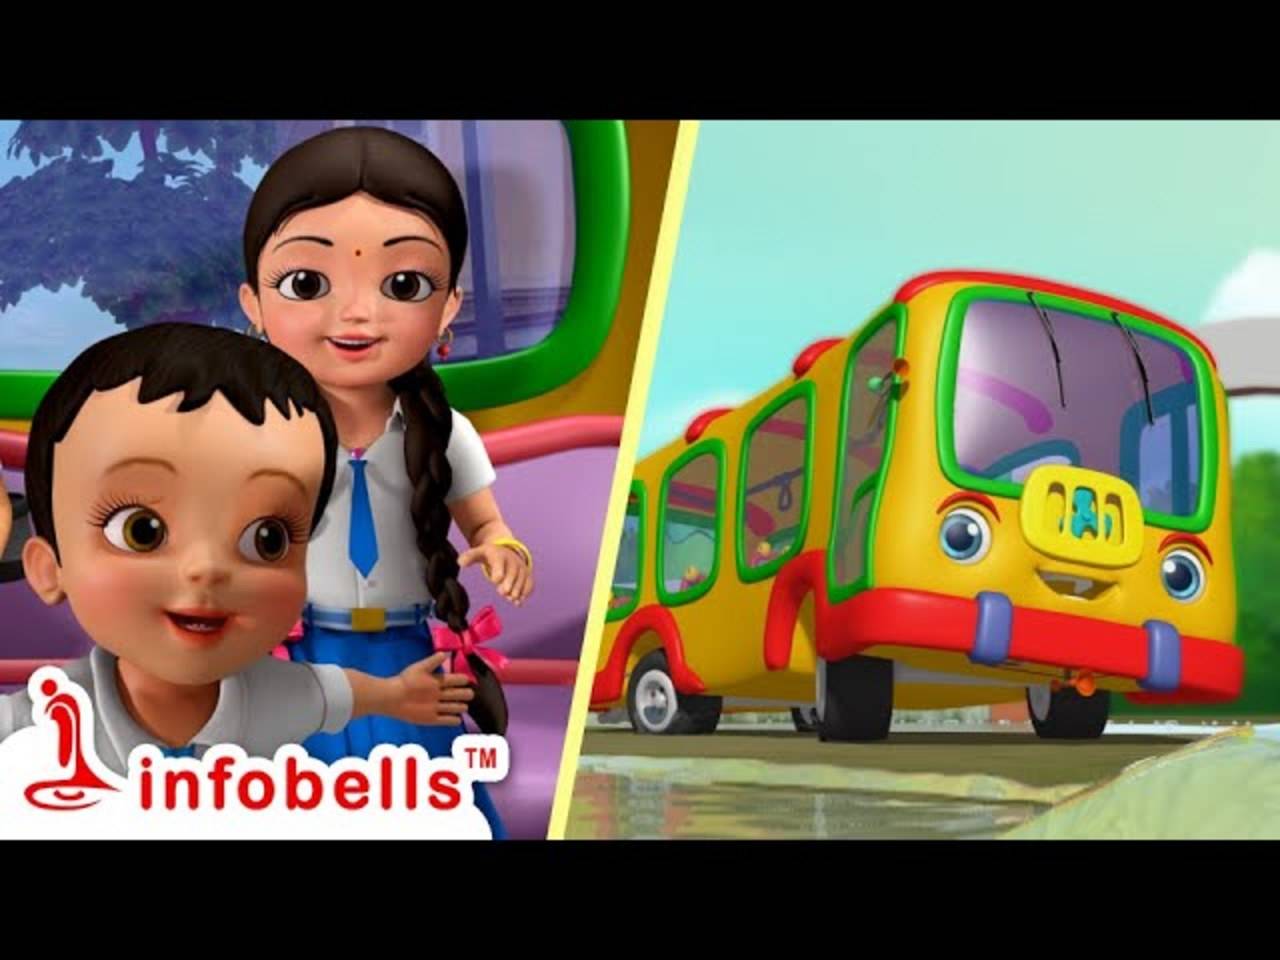 Watch The Popular Children Bengali Nursery Rhyme 'School Bus Song' For Kids  - Check Out Fun Kids Nursery Rhymes And School Bus Song In Bengali |  Entertainment - Times of India Videos